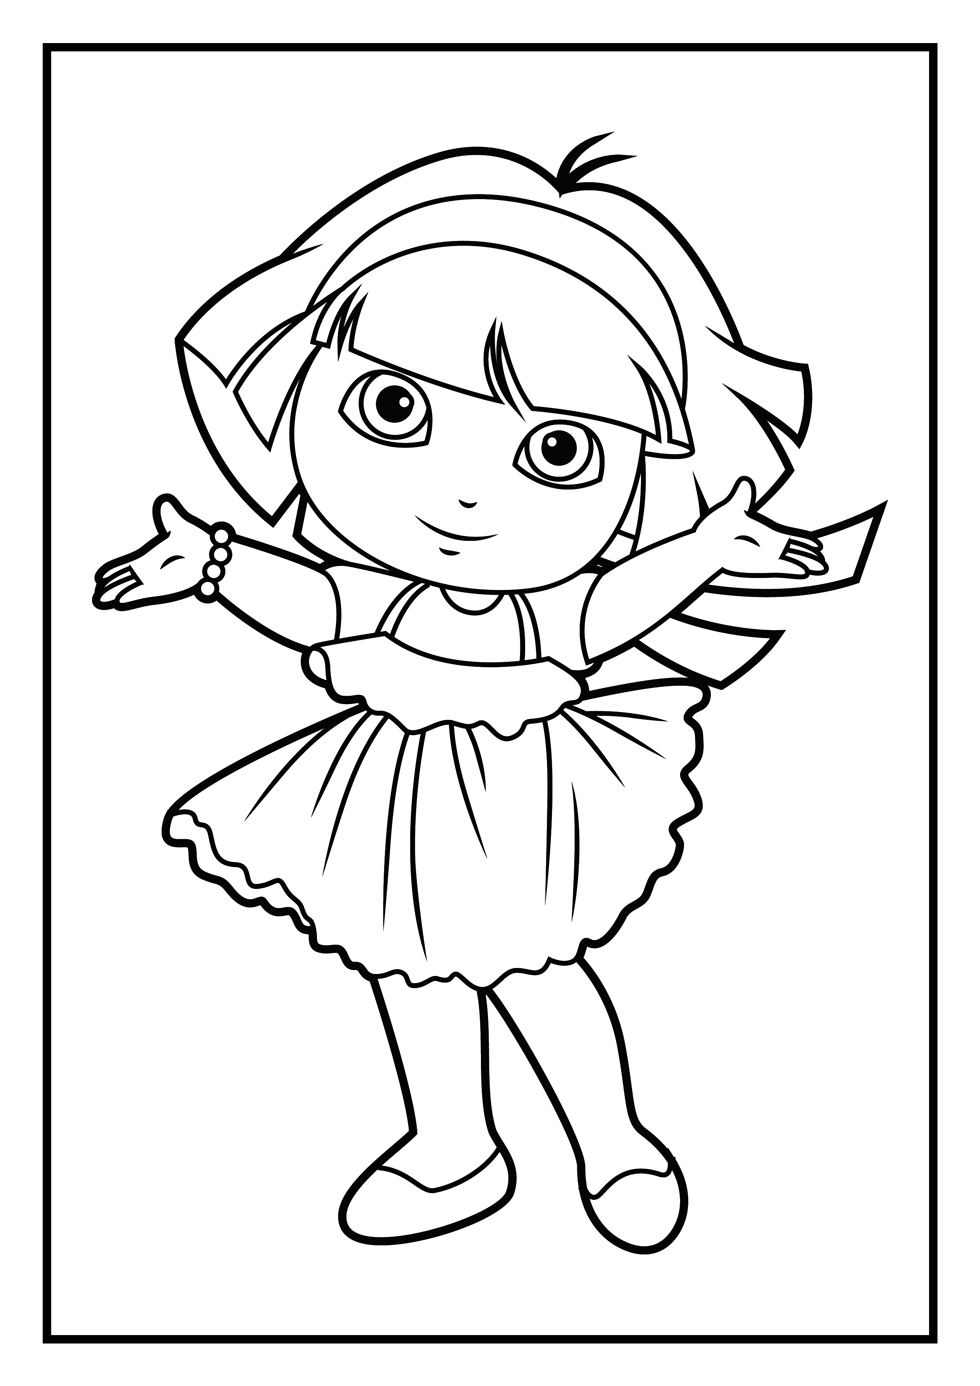 games coloring pages online - photo #39